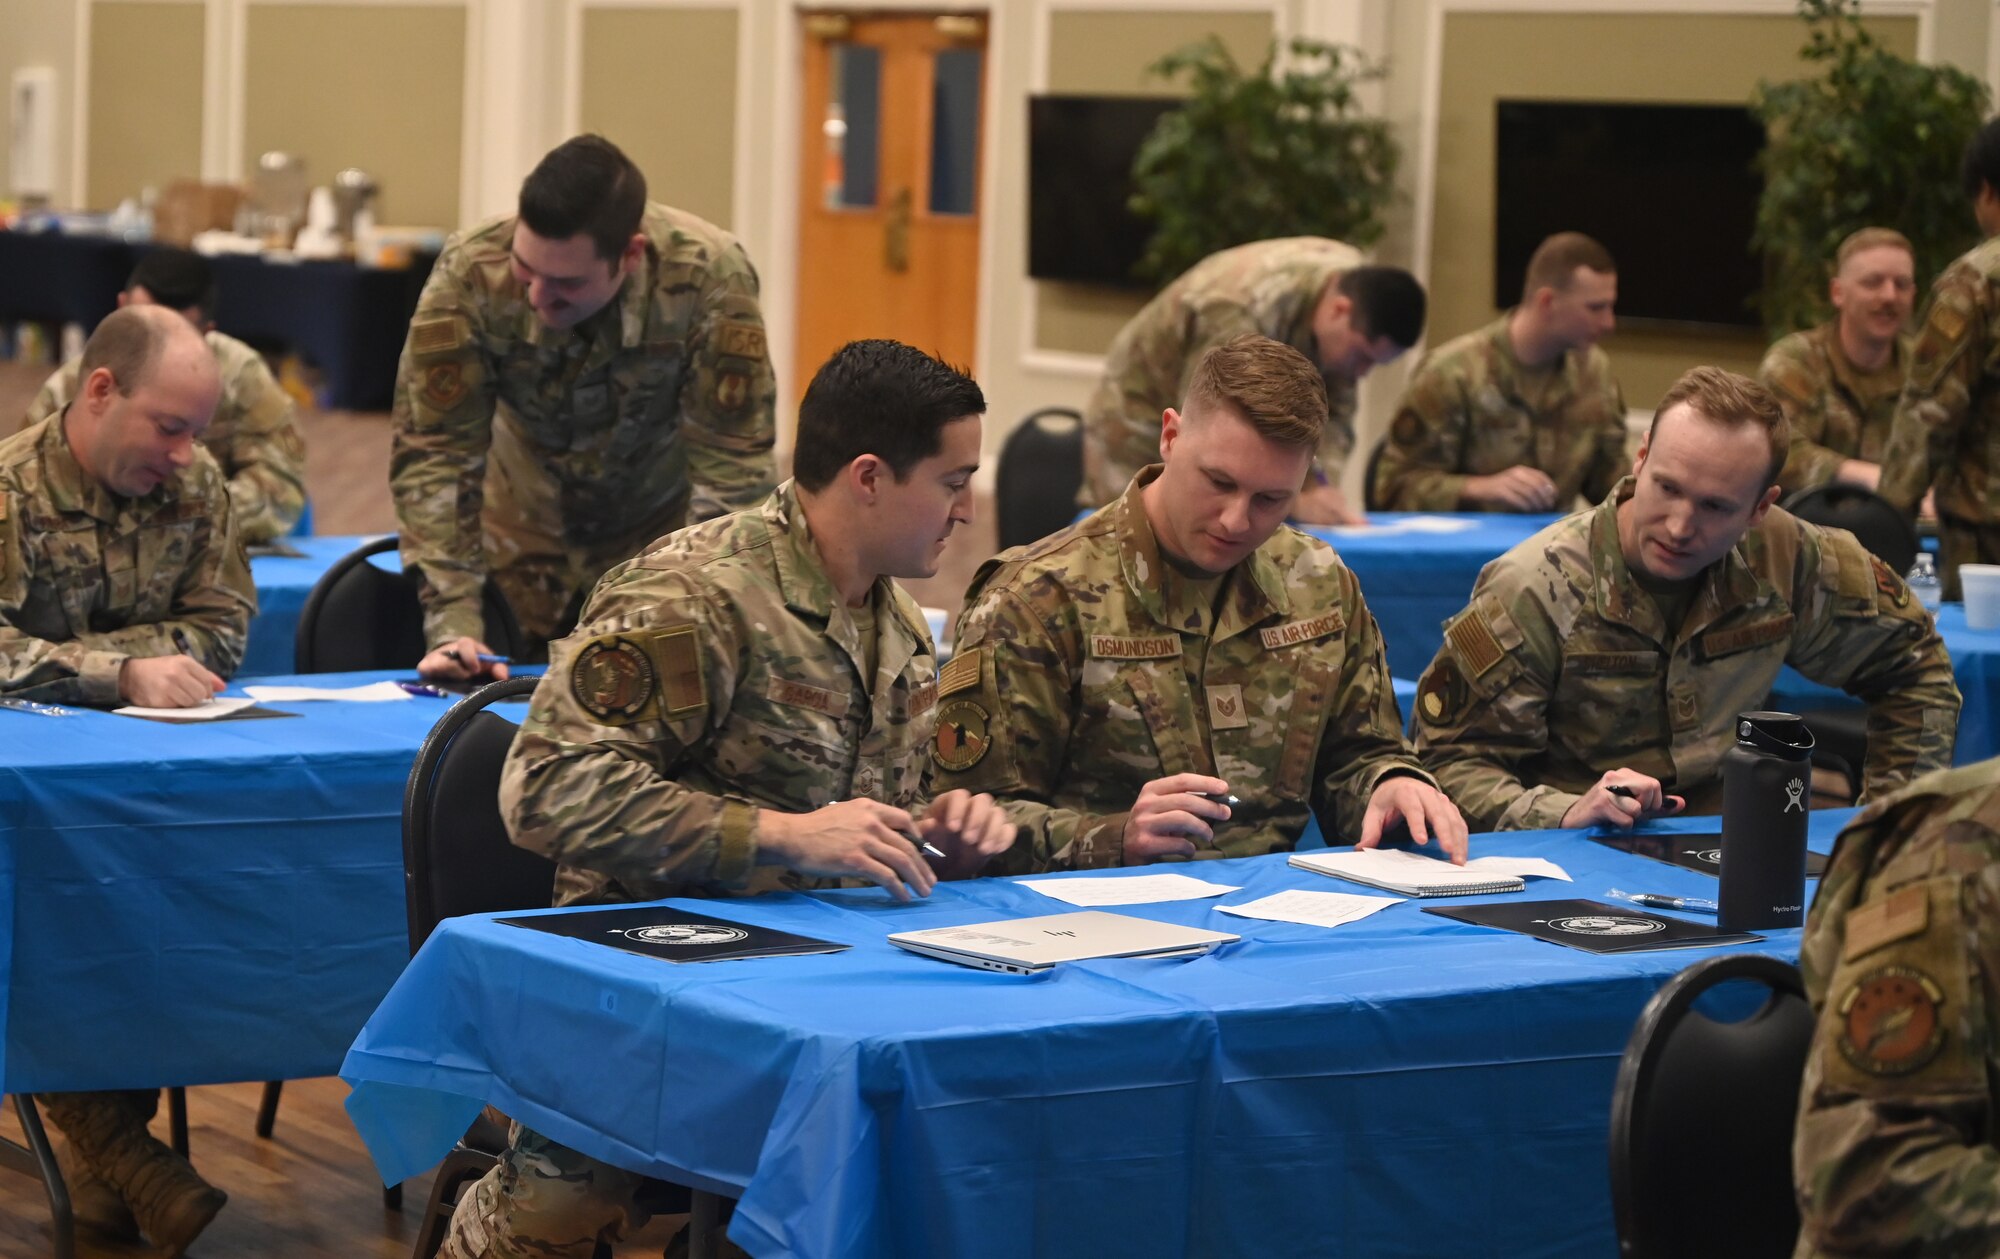 Student airmen exchange information in an icebreaker activity prior to the bulk of the agenda at Joint Base San Antonio-Lackland, Texas on March 27, 2023. (U.S. Air Force photo by 2nd Lt. Alex Dieguez)